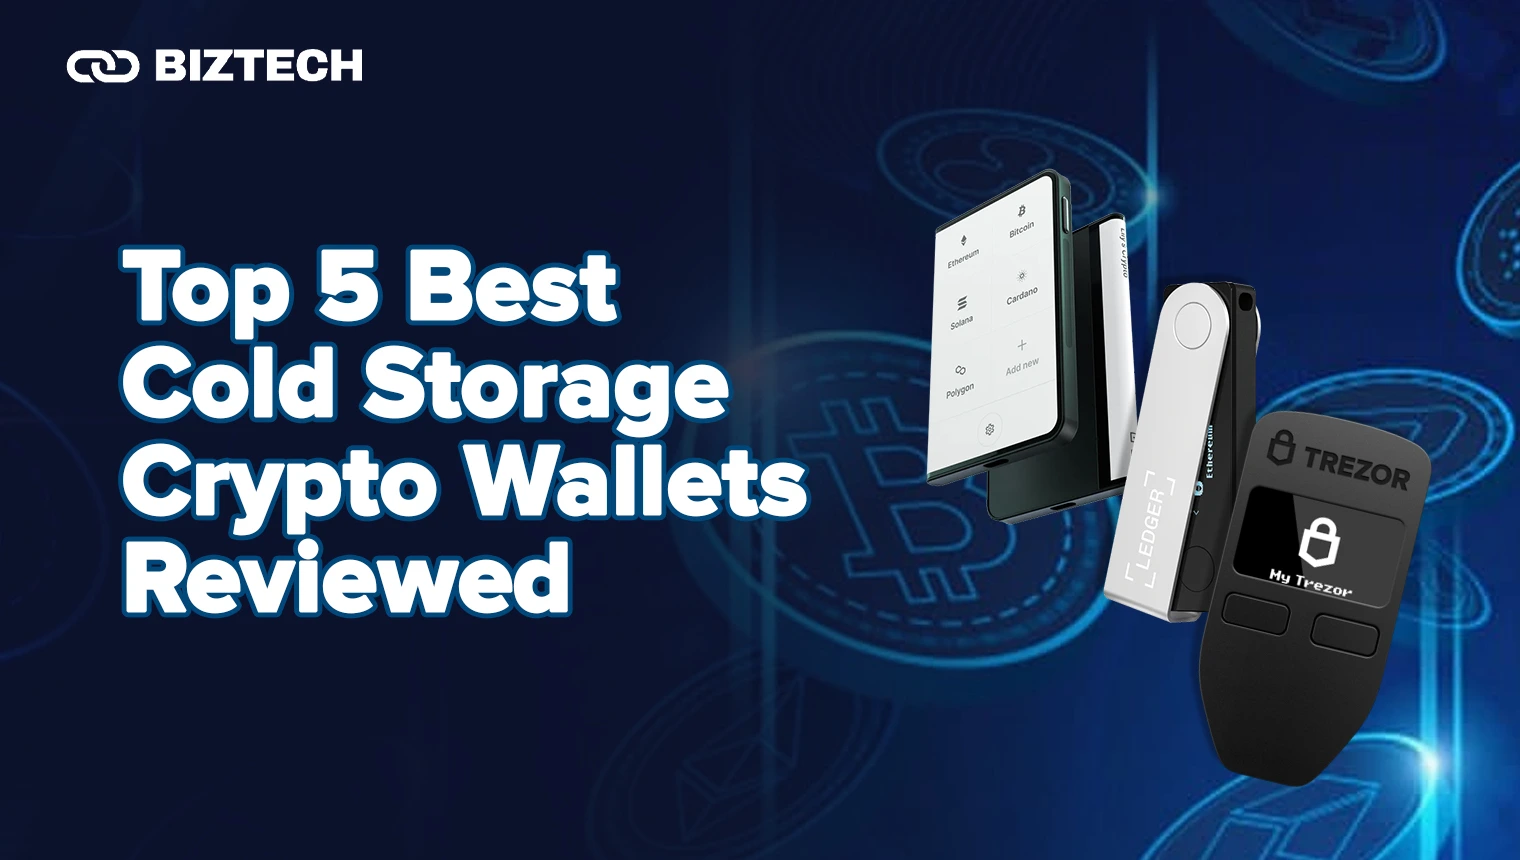 Top 5 Best Cold Storage Crypto Wallets Reviewed